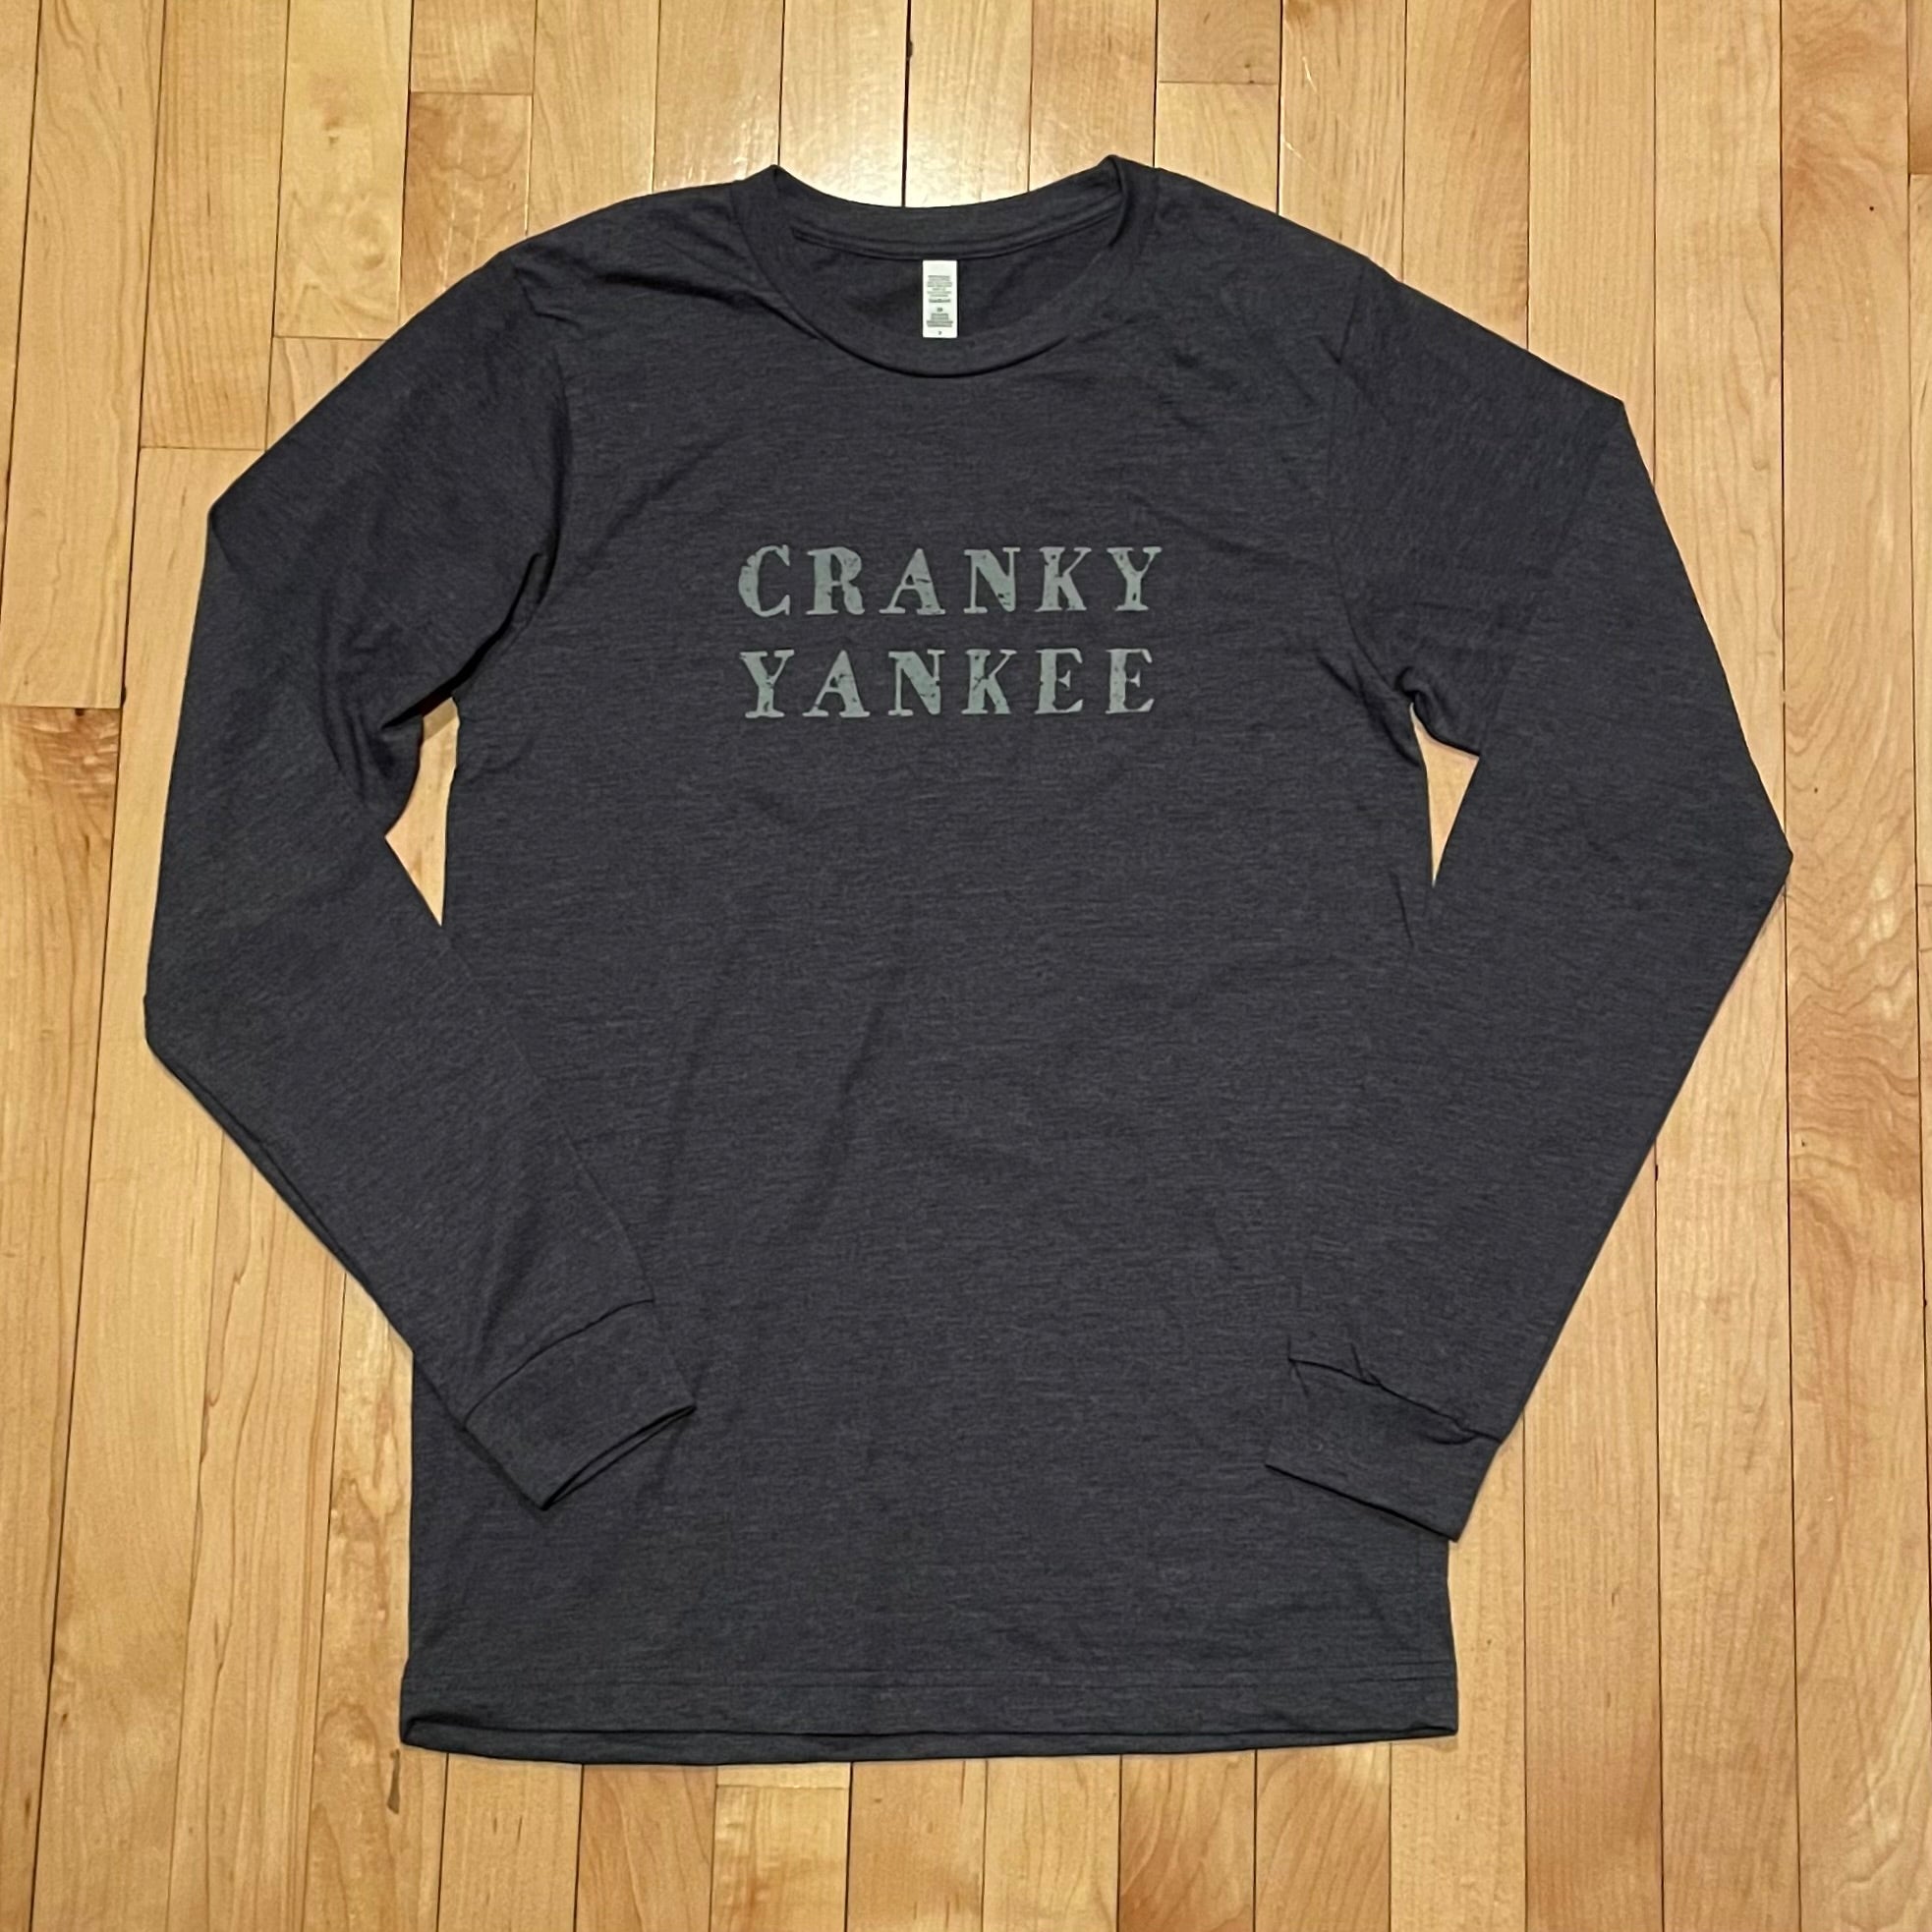 Yankee shirt is a Large and it fits amazing. Black album shirt that has